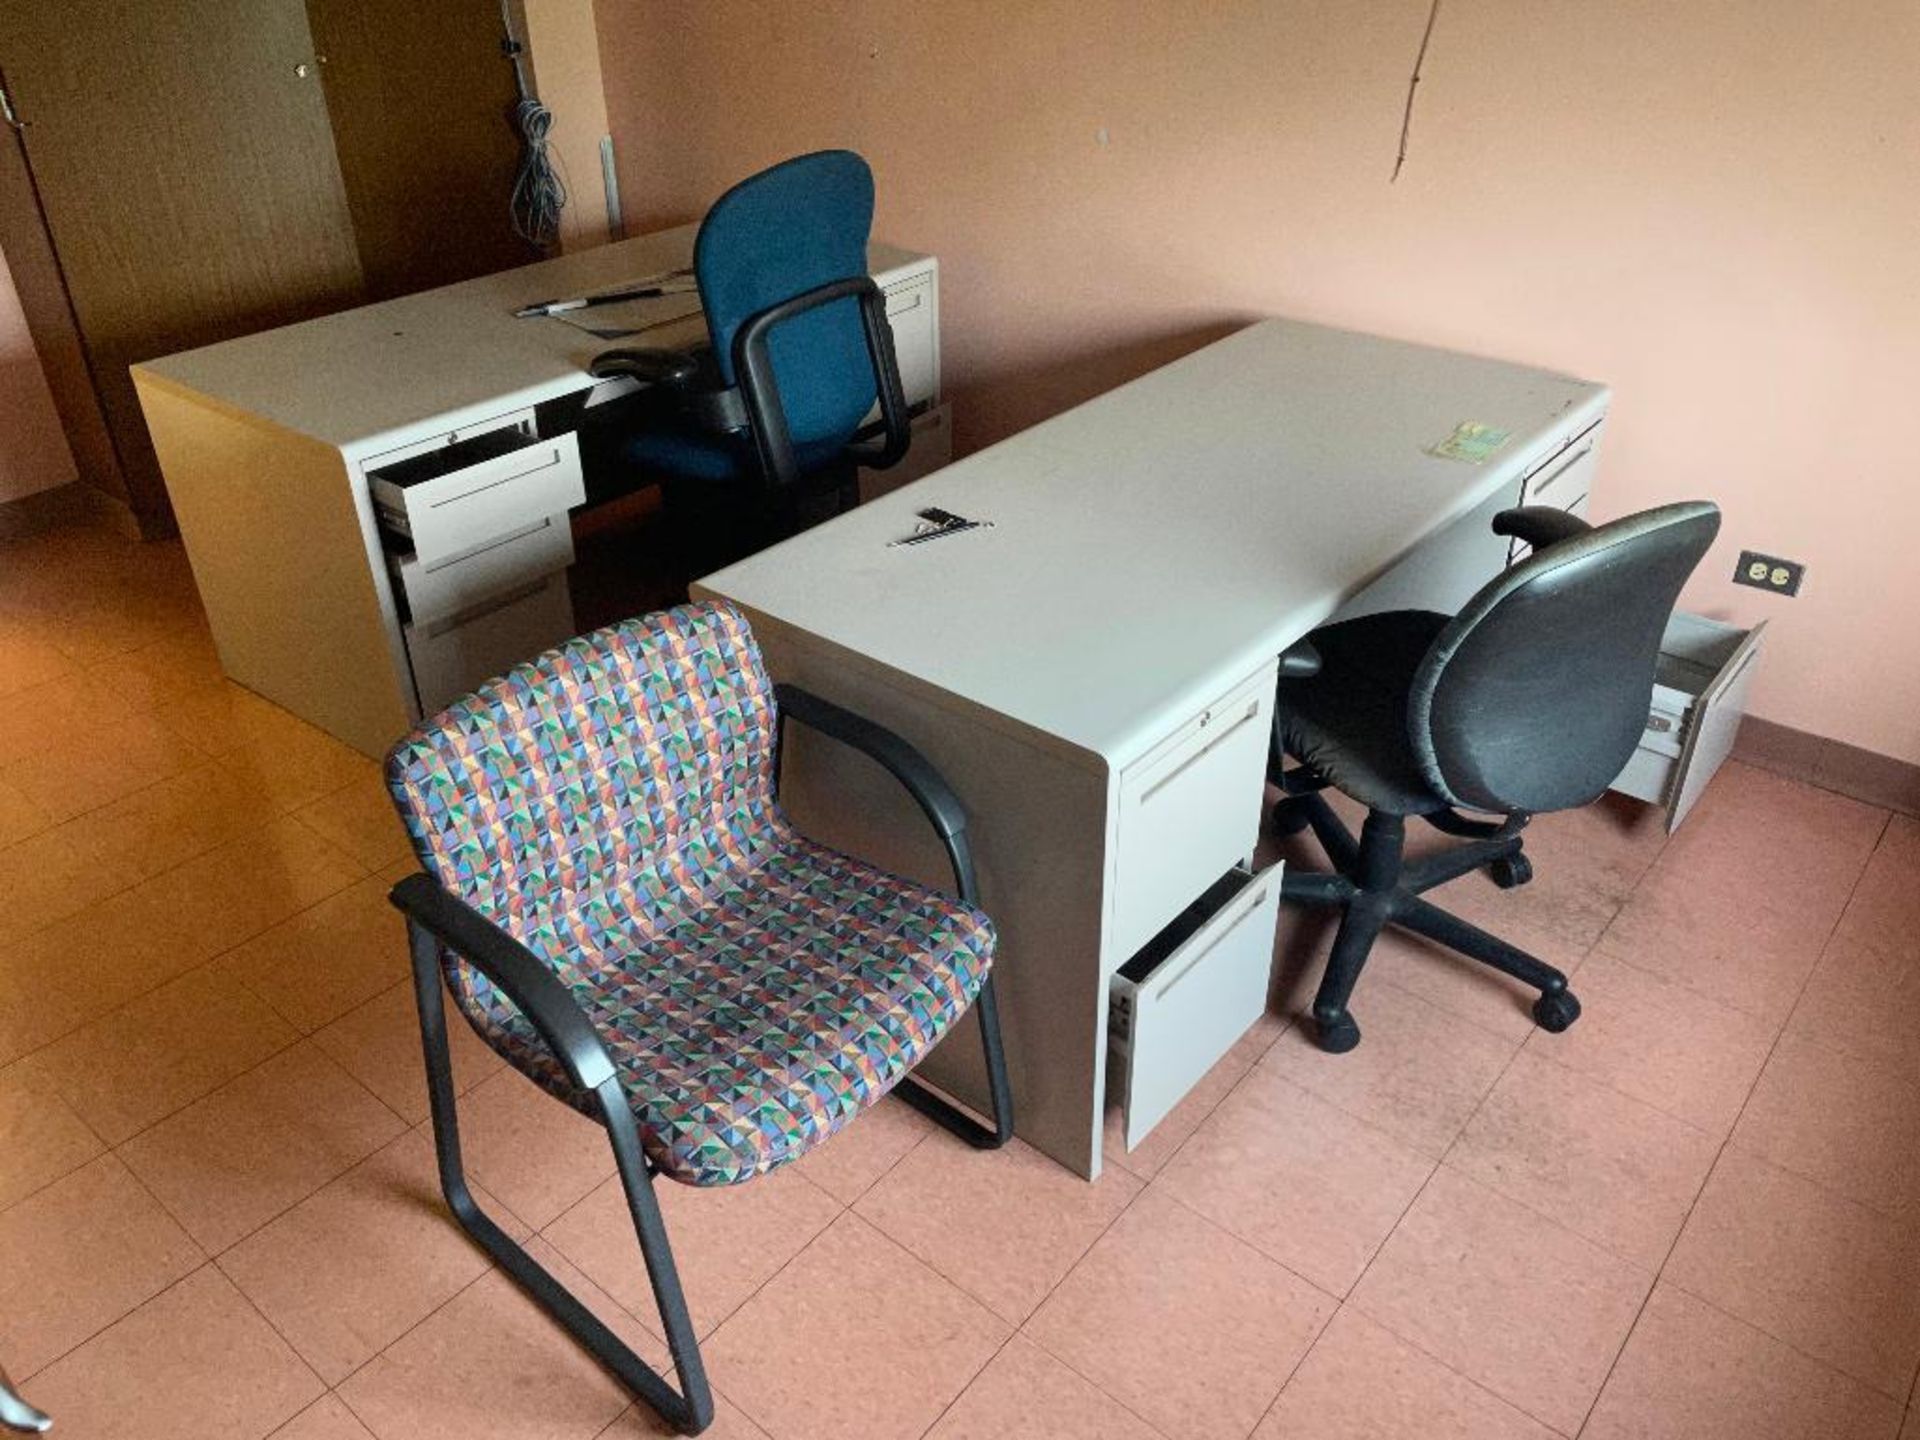 DESCRIPTION: MULTI PIECE OFFICE FURNITURE SET ADDITIONAL INFORMATION: ALL FURNITURE CONTENTS IN ROOM